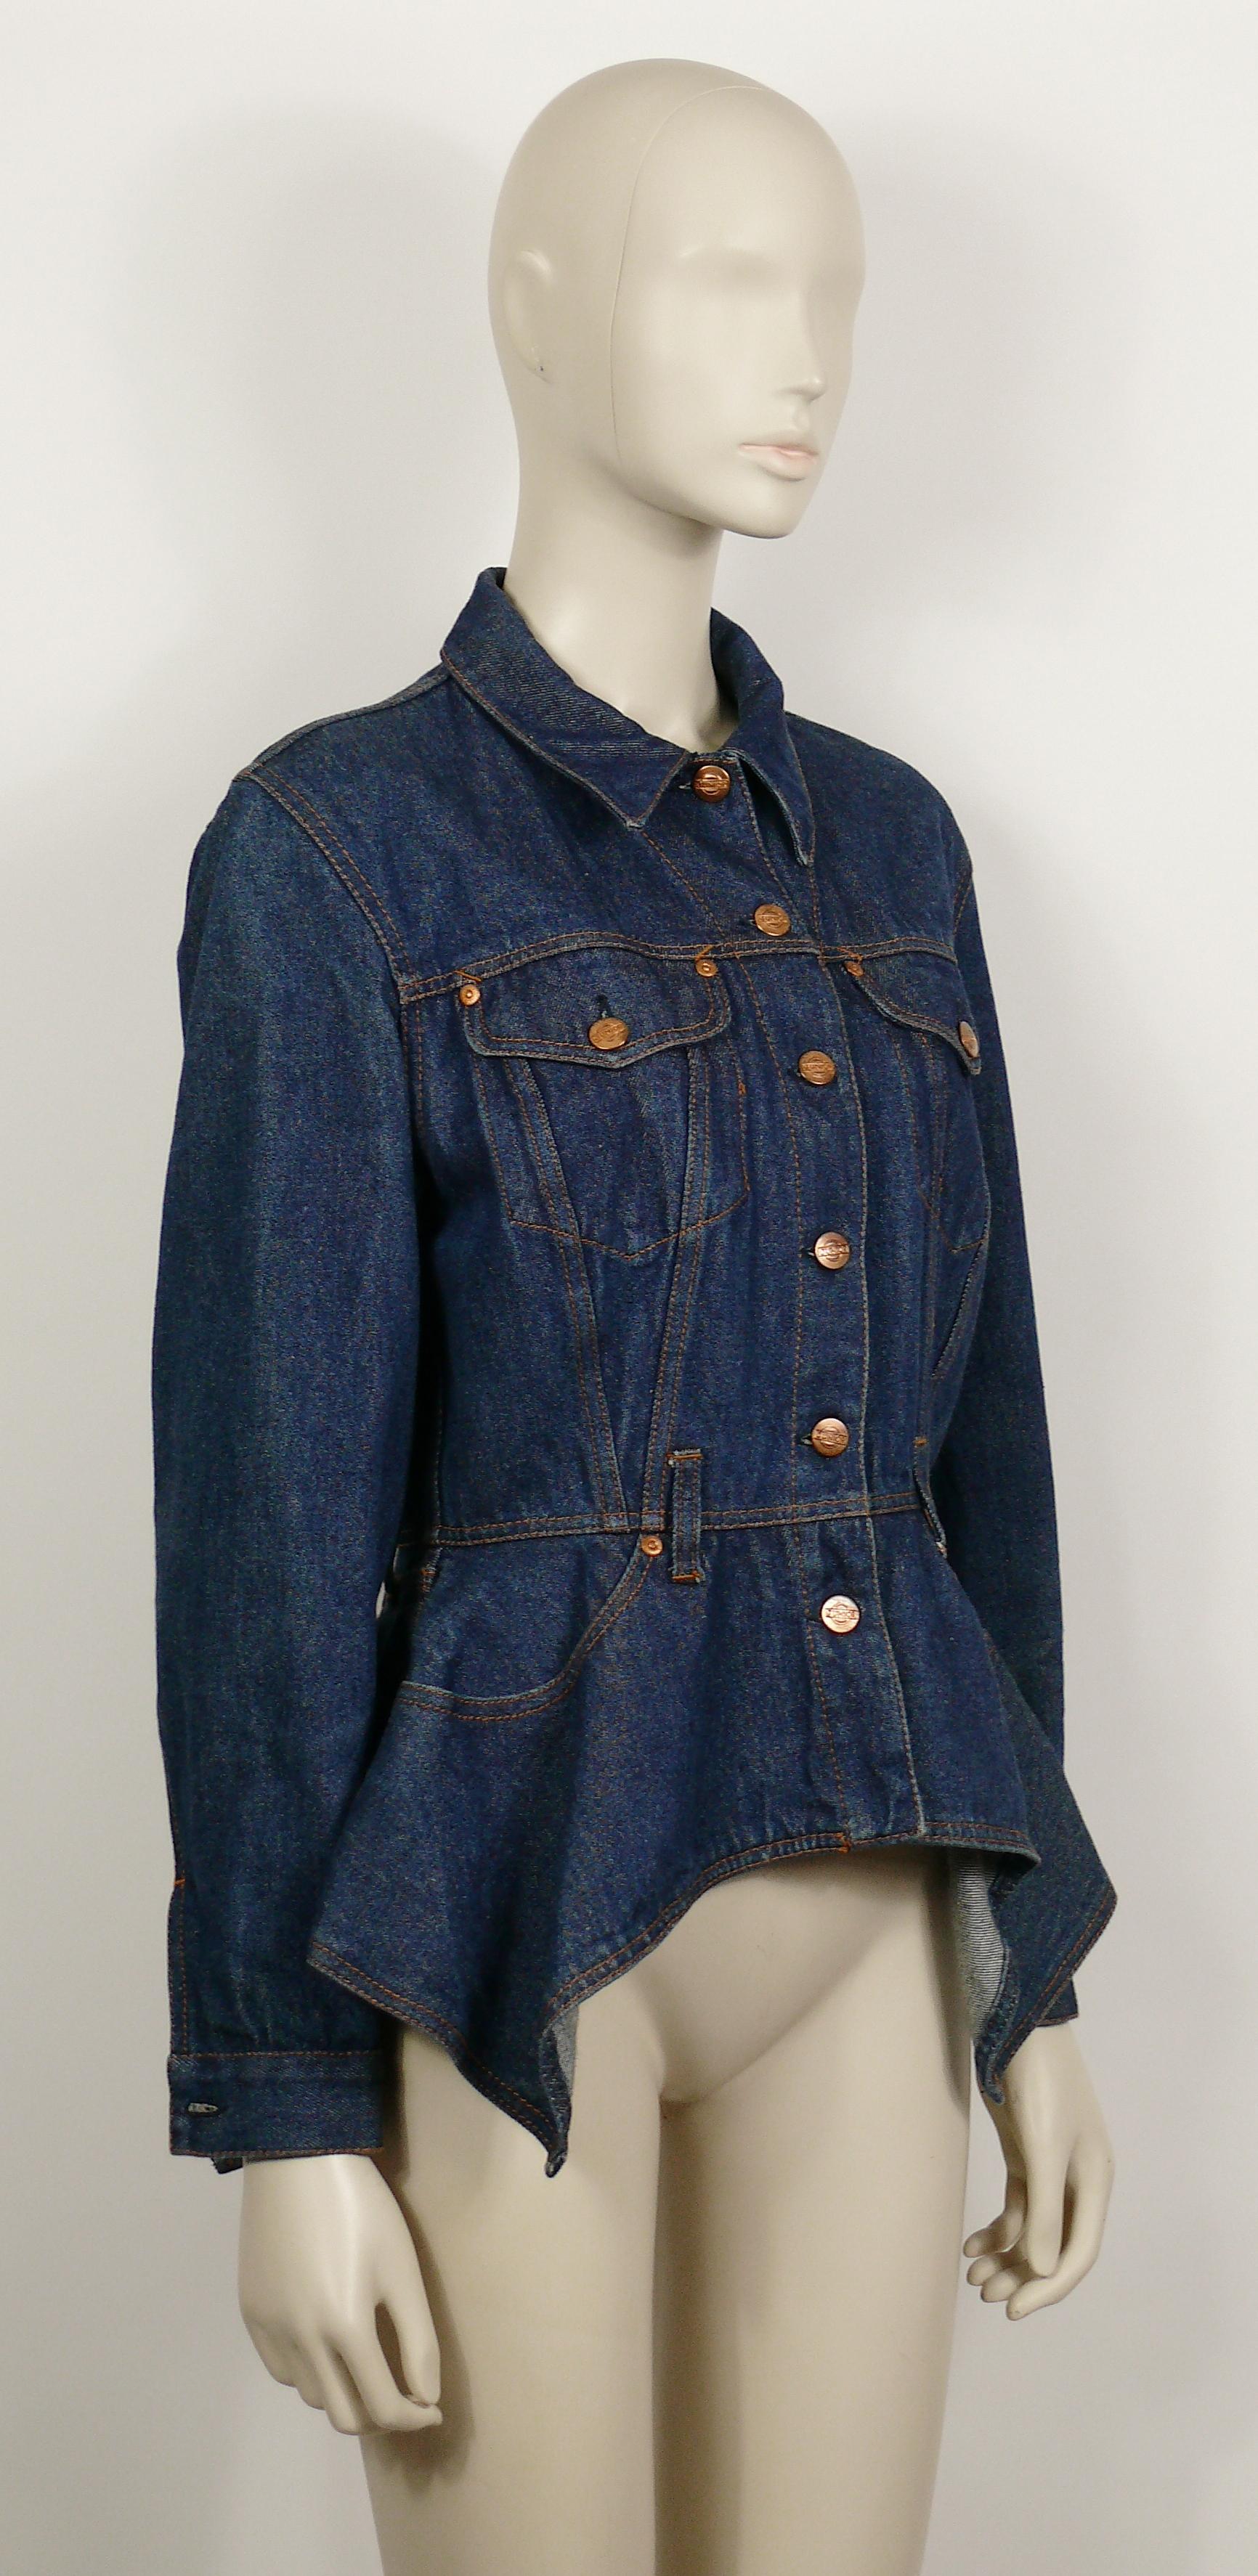 JEAN PAUL GAULTIER Junior vintage blue denim peplum jacket.

This jacket features :
- Peplum cut design.
- Long sleeves.
- Button down closure.
- Cuff buttoning.
- Copper toned buttons and rivets embossed JUNIOR.
- Four front pockets.
- Two back